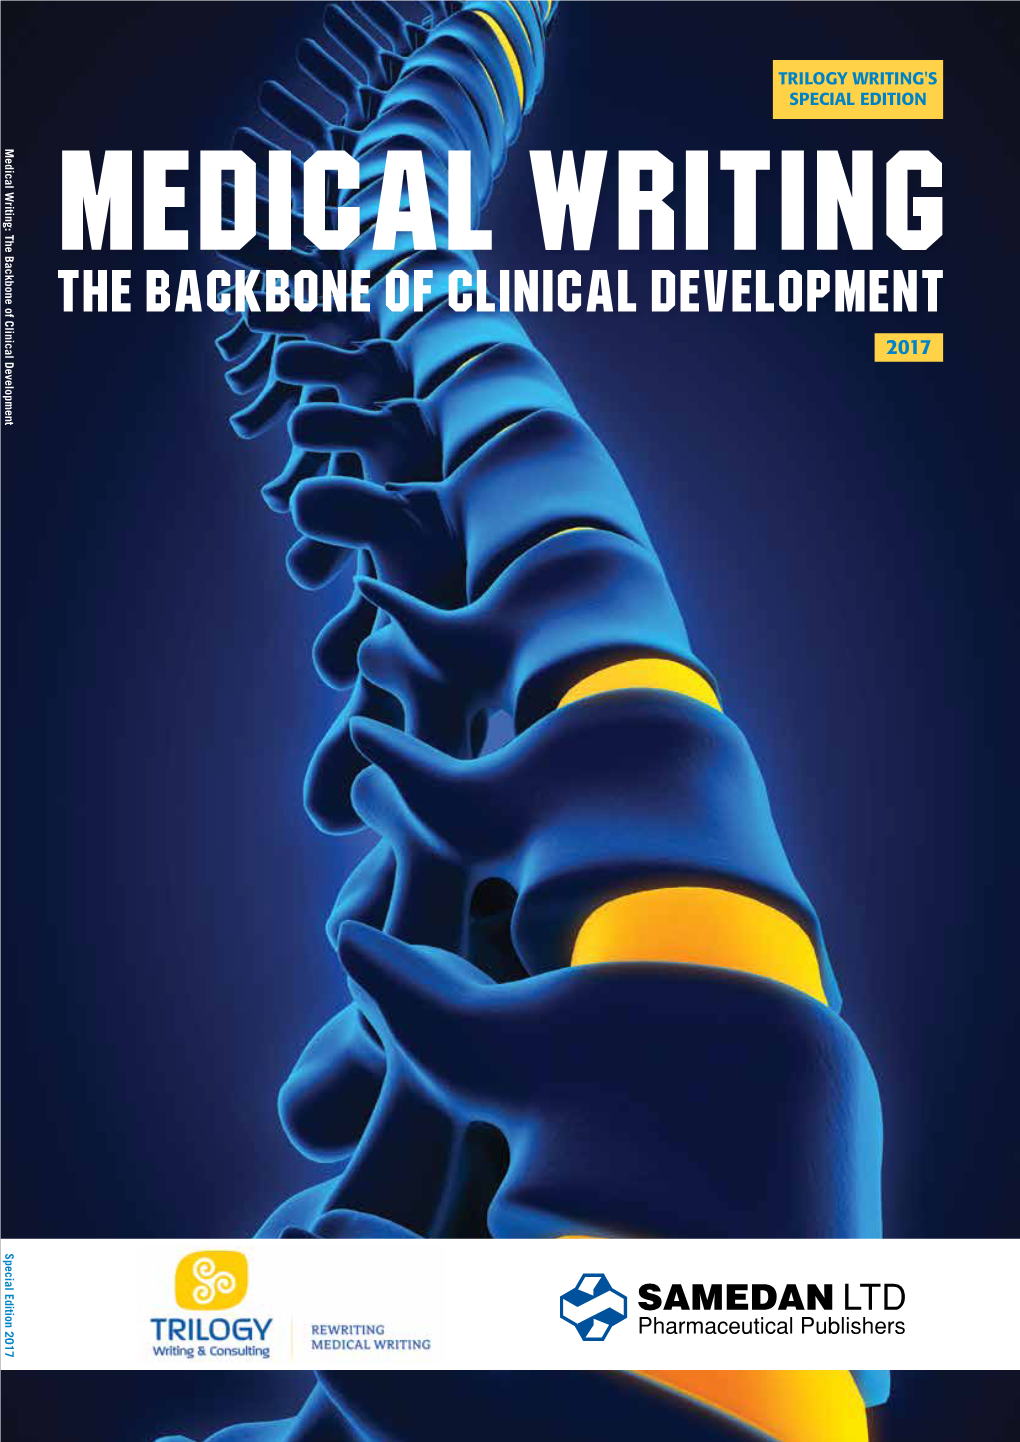 The Backbone of Clinical Development Medical Writing the Backbone of Clinical Development 2017 Special Edition 2017 Leading the Transformation of R&D